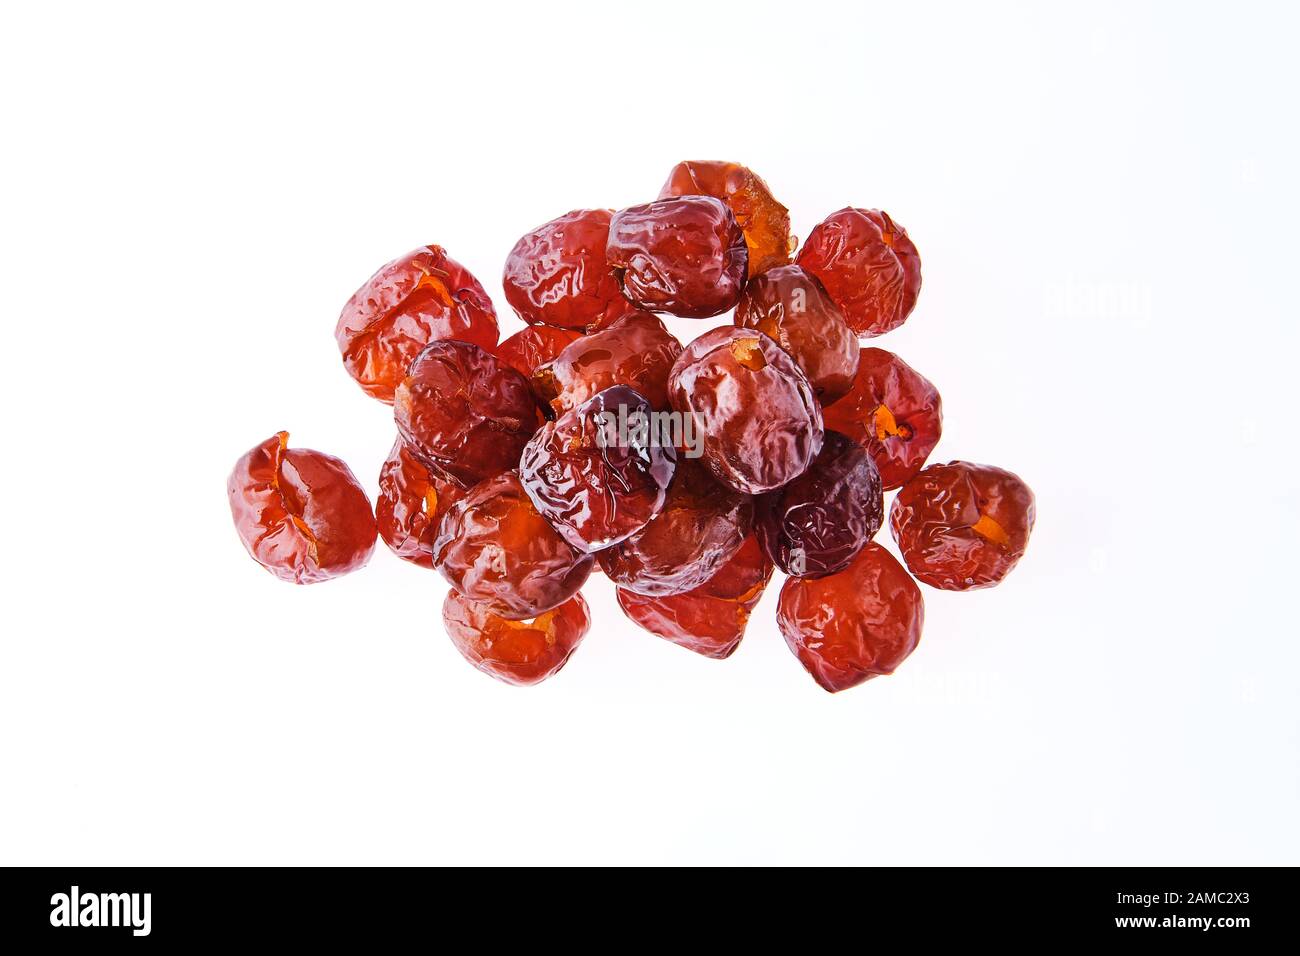 Overhead view of date fruit isolated on white background Stock Photo